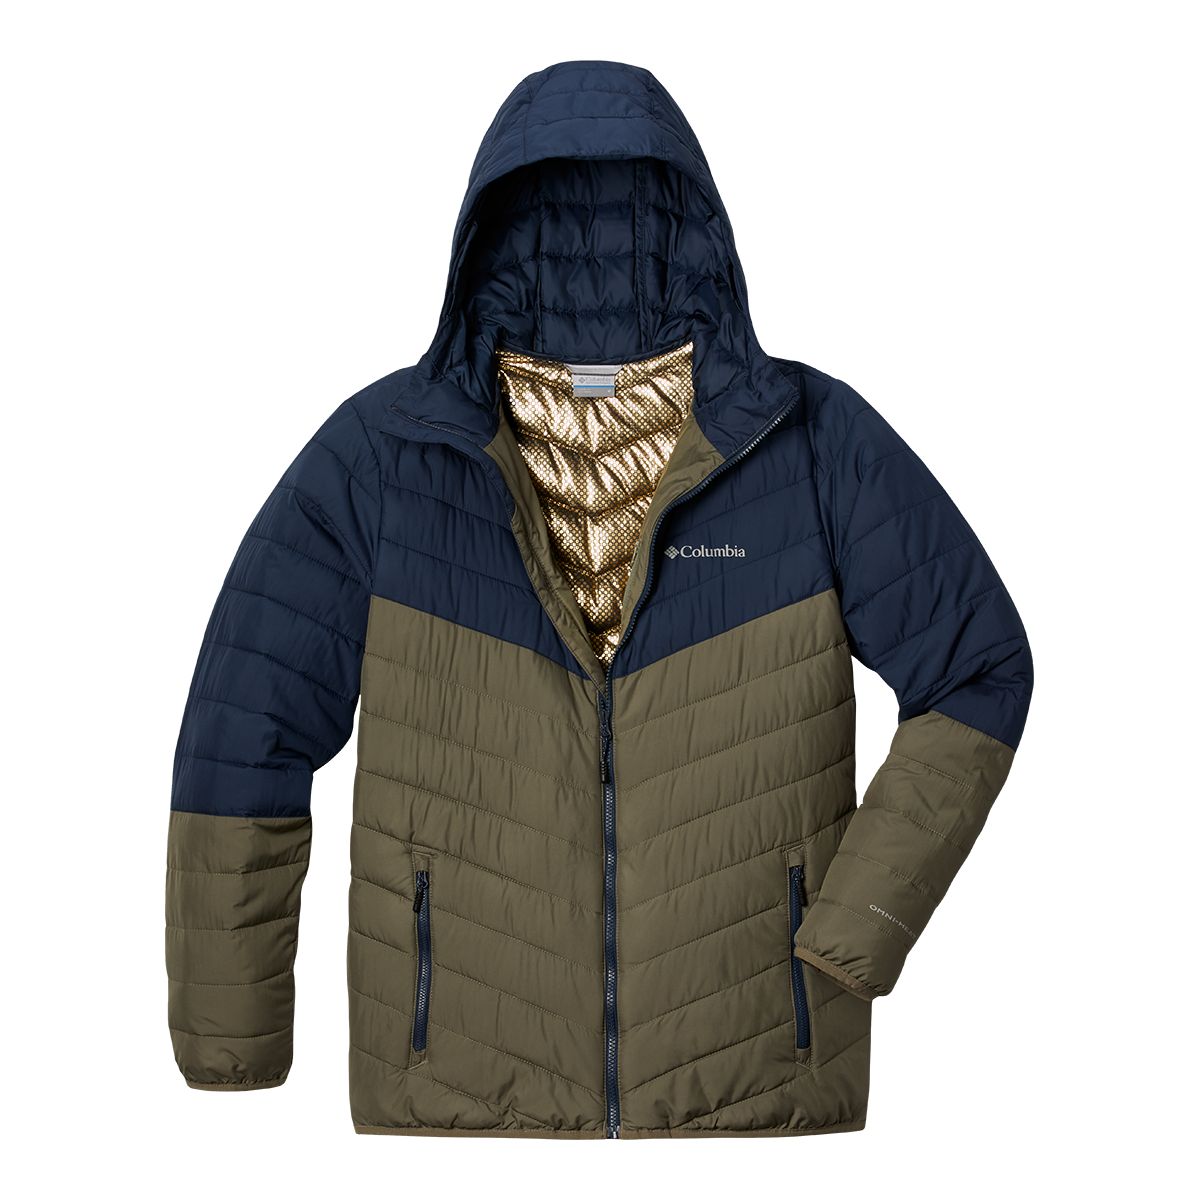 https://media-www.atmosphere.ca/product/div-03-softgoods/dpt-76-outerwear/sdpt-01-mens/333519946/columbia-mens-eddie-gorge-hoo-stone-green-s--57e3dab2-ab2d-4d29-a6c0-42417835e4aa-jpgrendition.jpg?imdensity=1&imwidth=1244&impolicy=mZoom